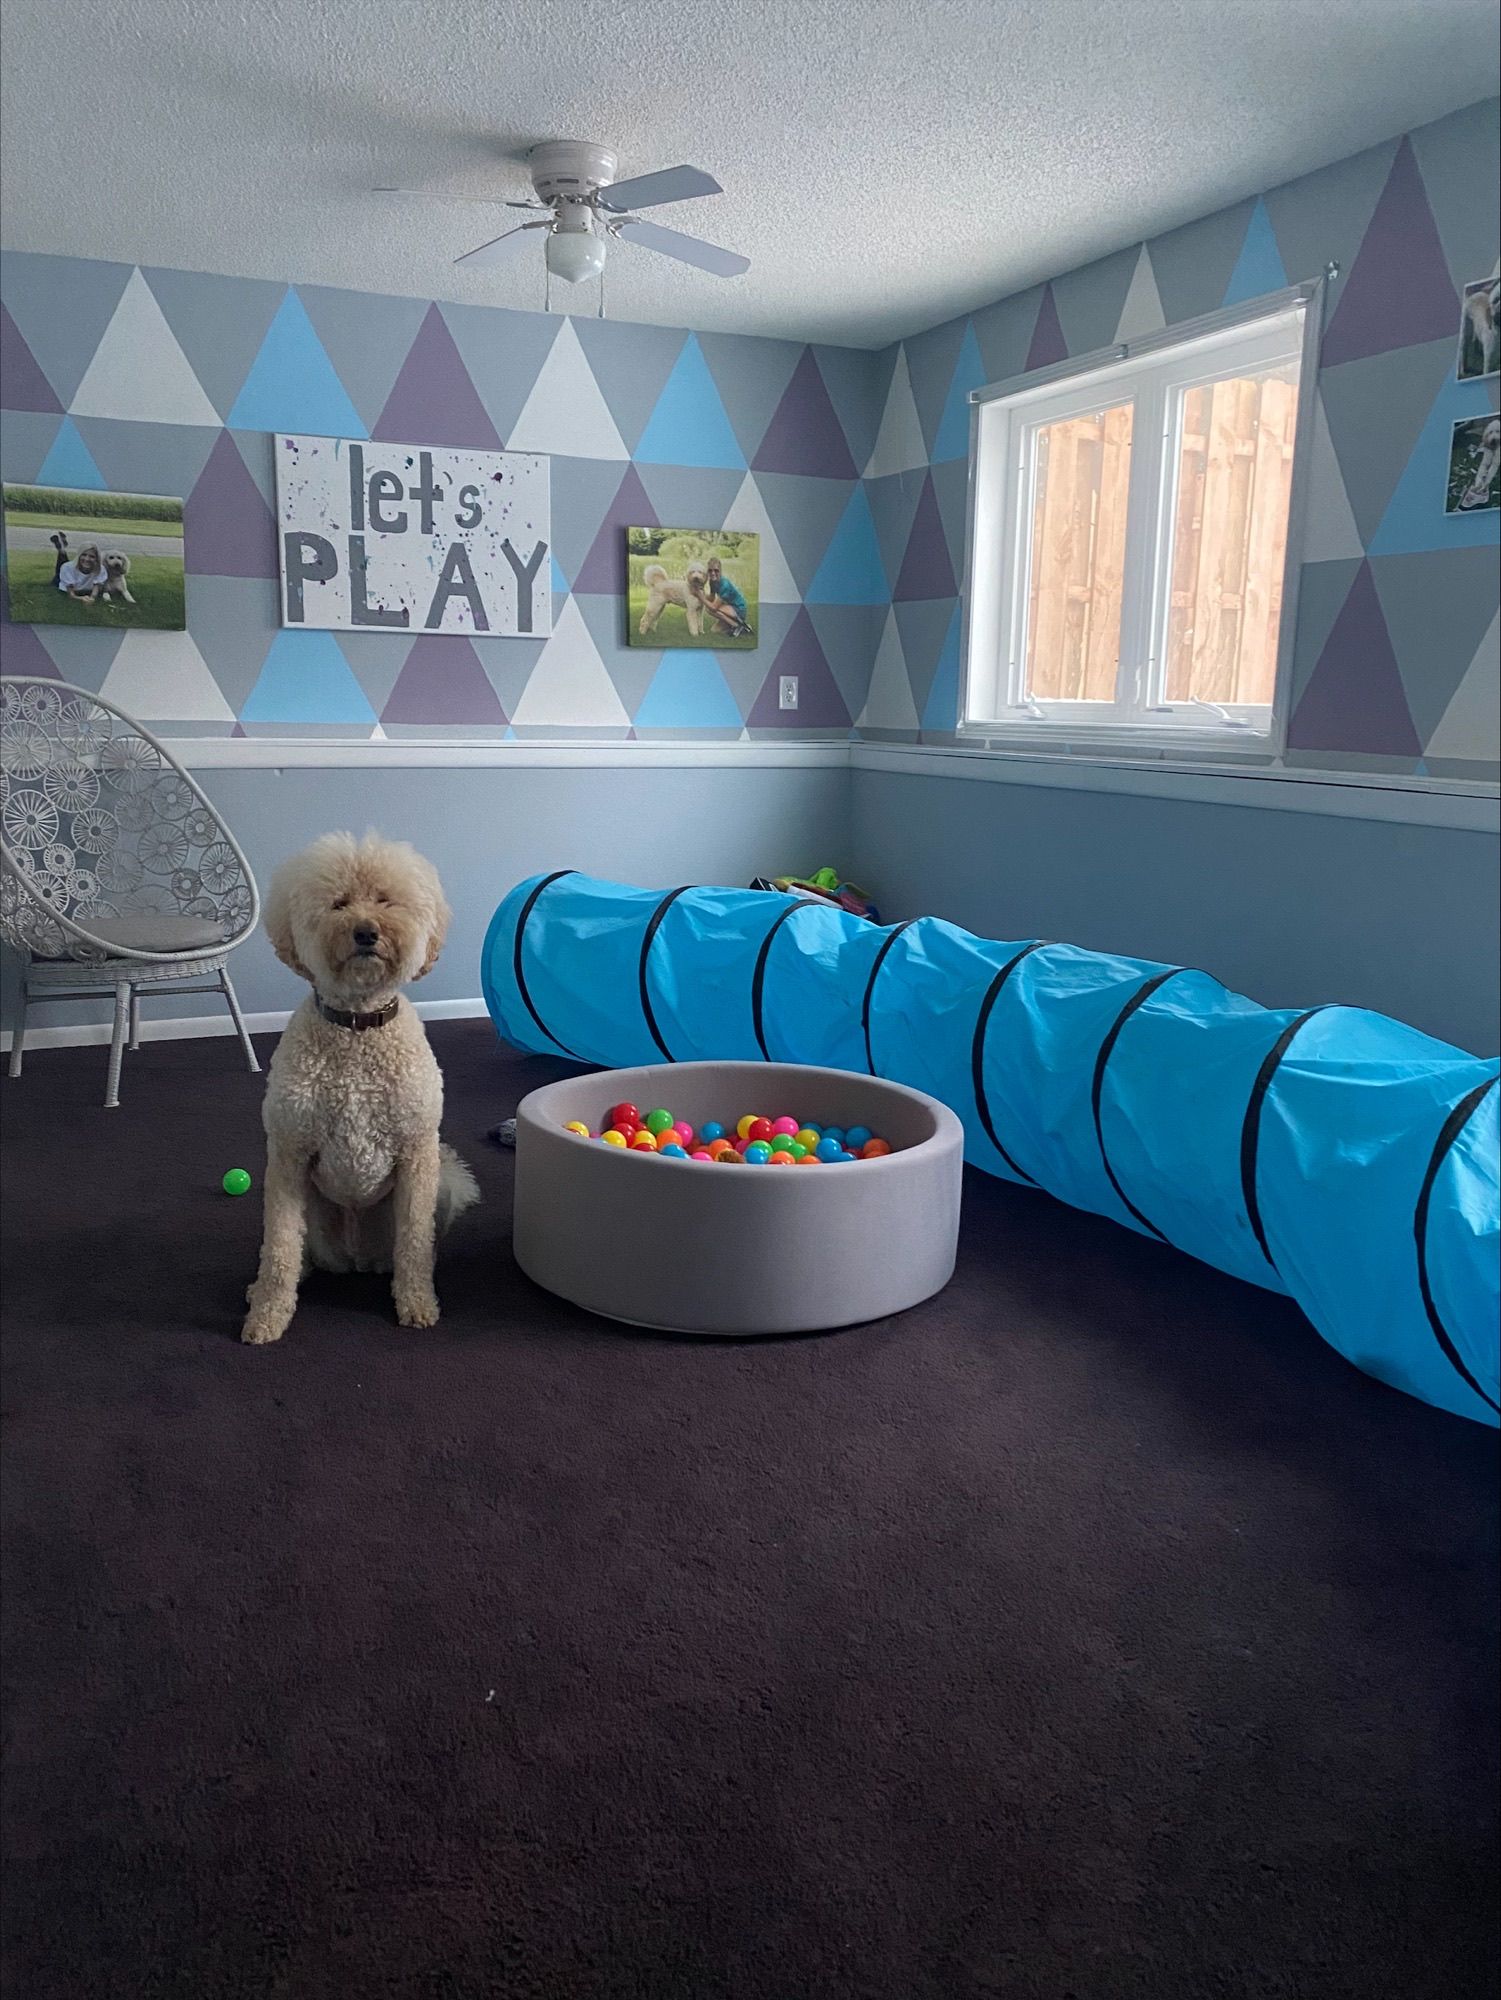 a goldendoodle sitting in a blue bedroom full of toys